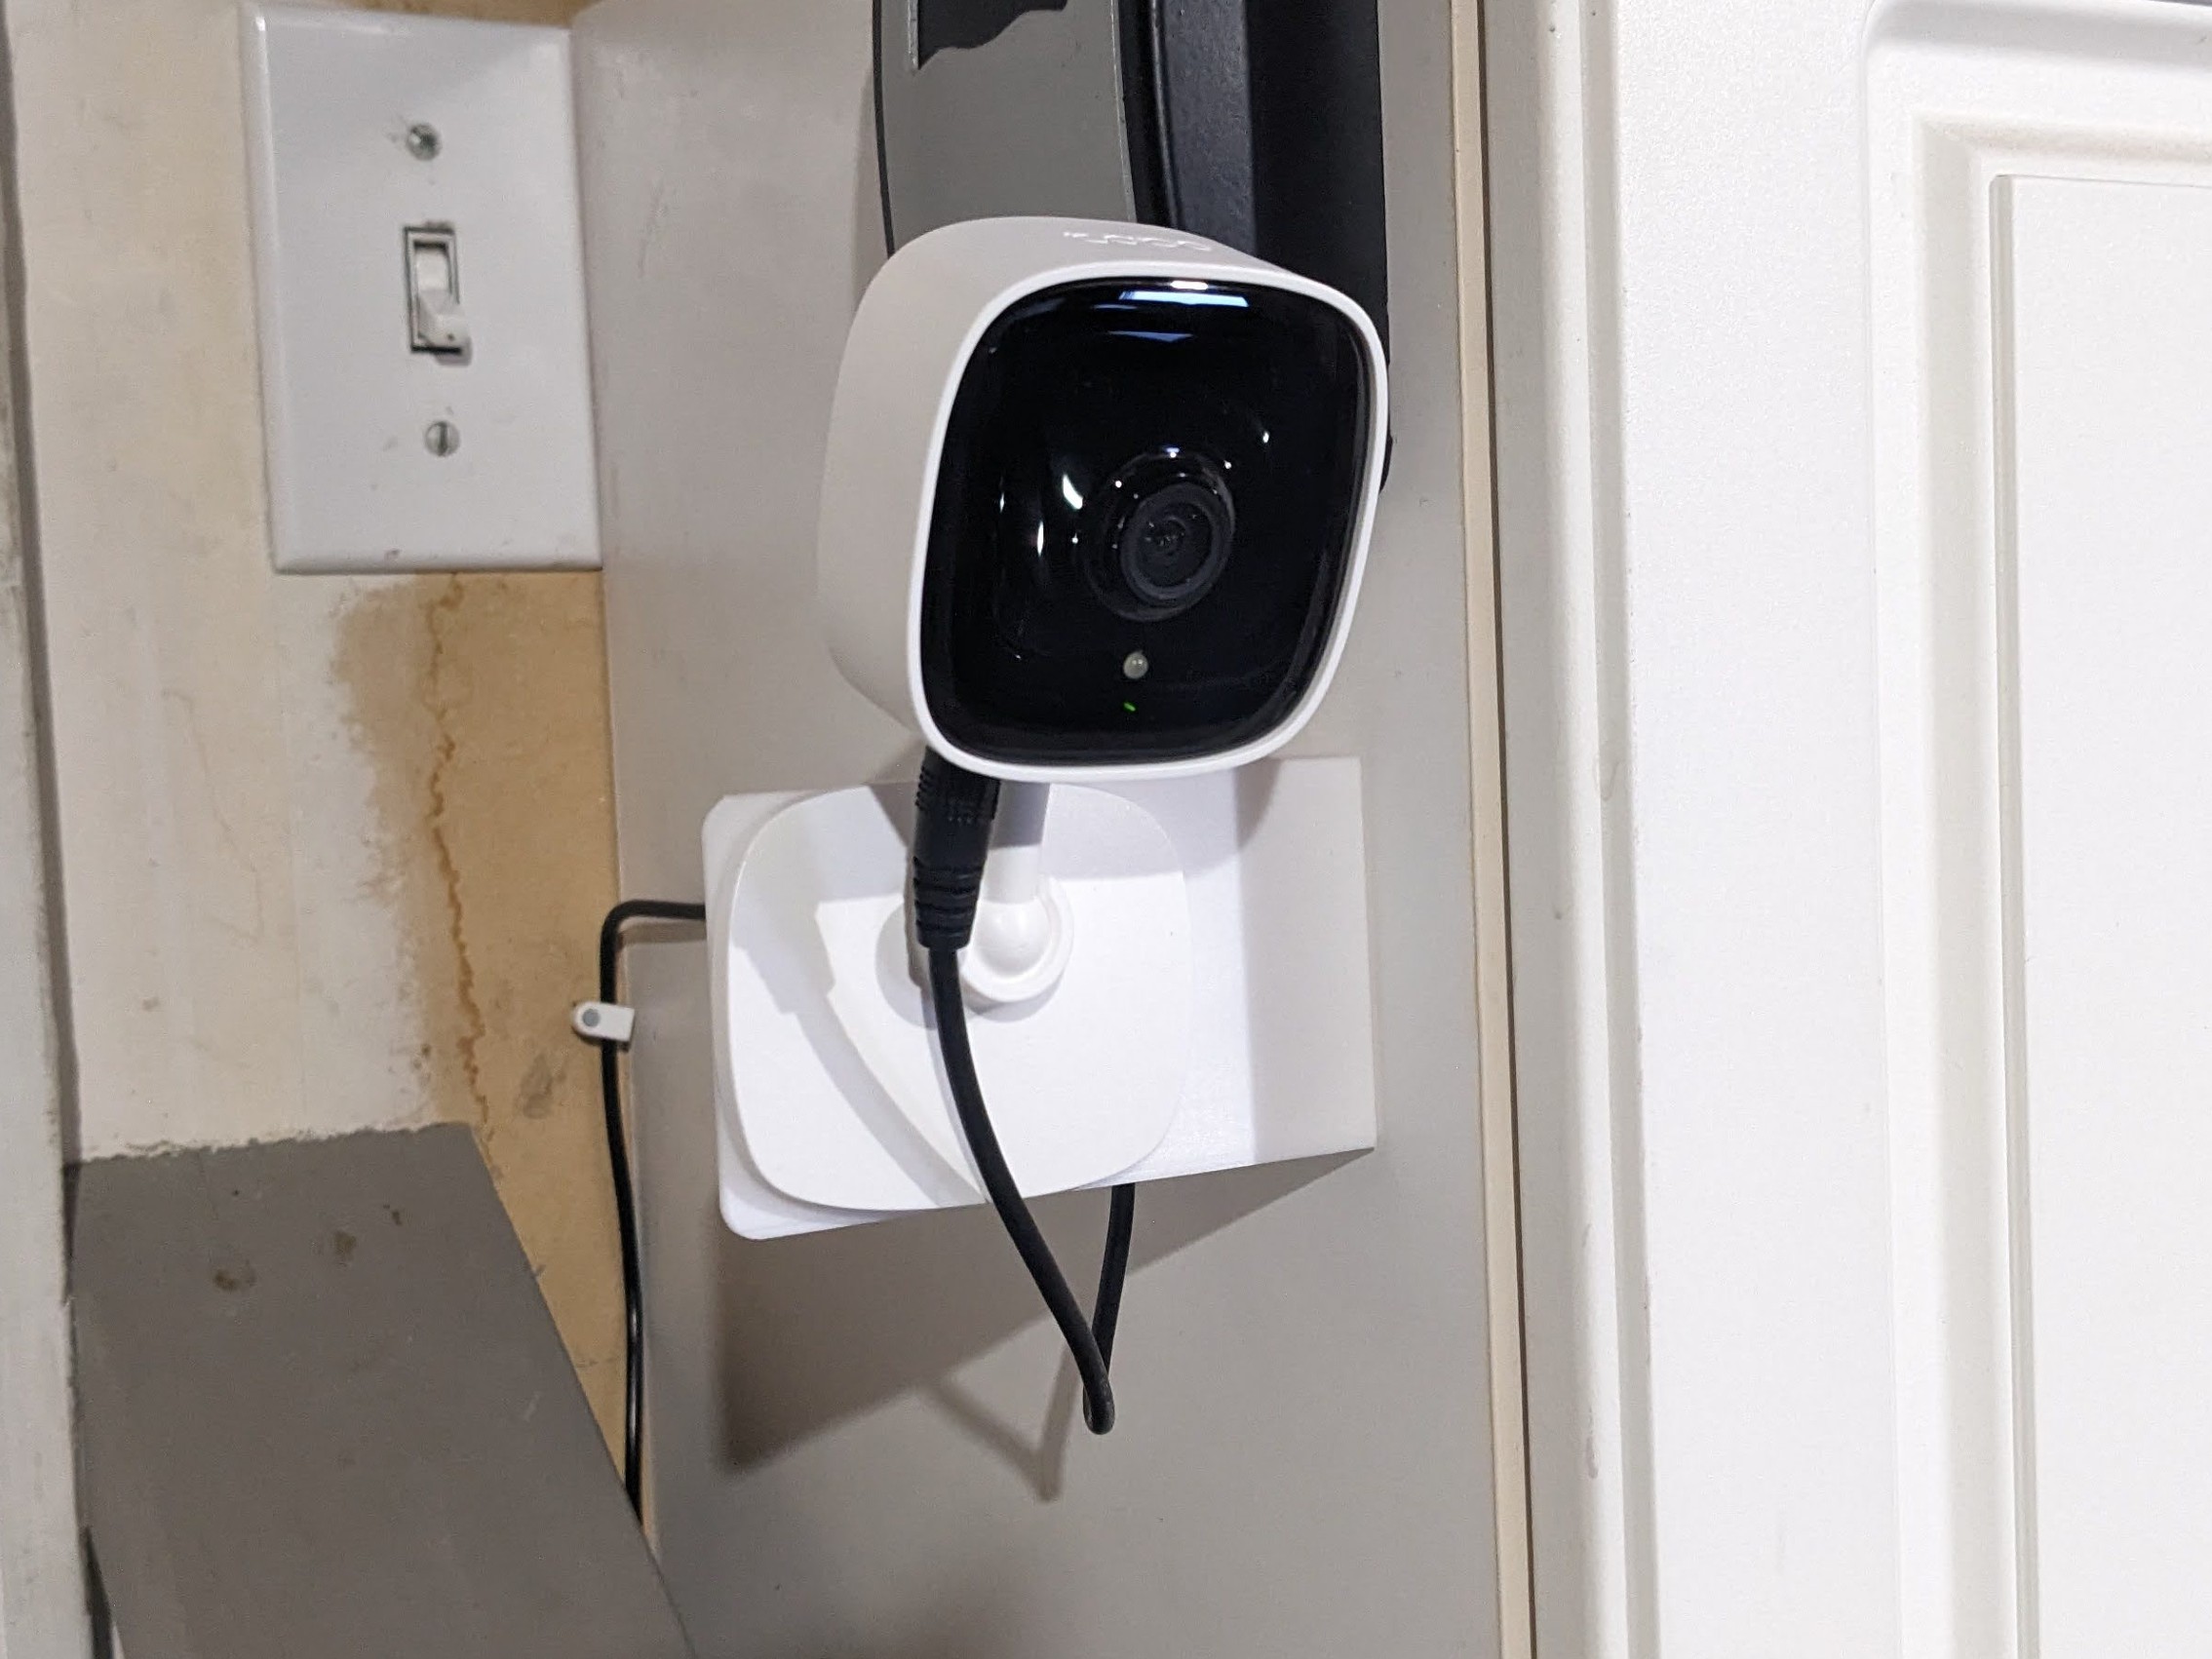 File:Tapo C100 security camera.jpg - Wikimedia Commons